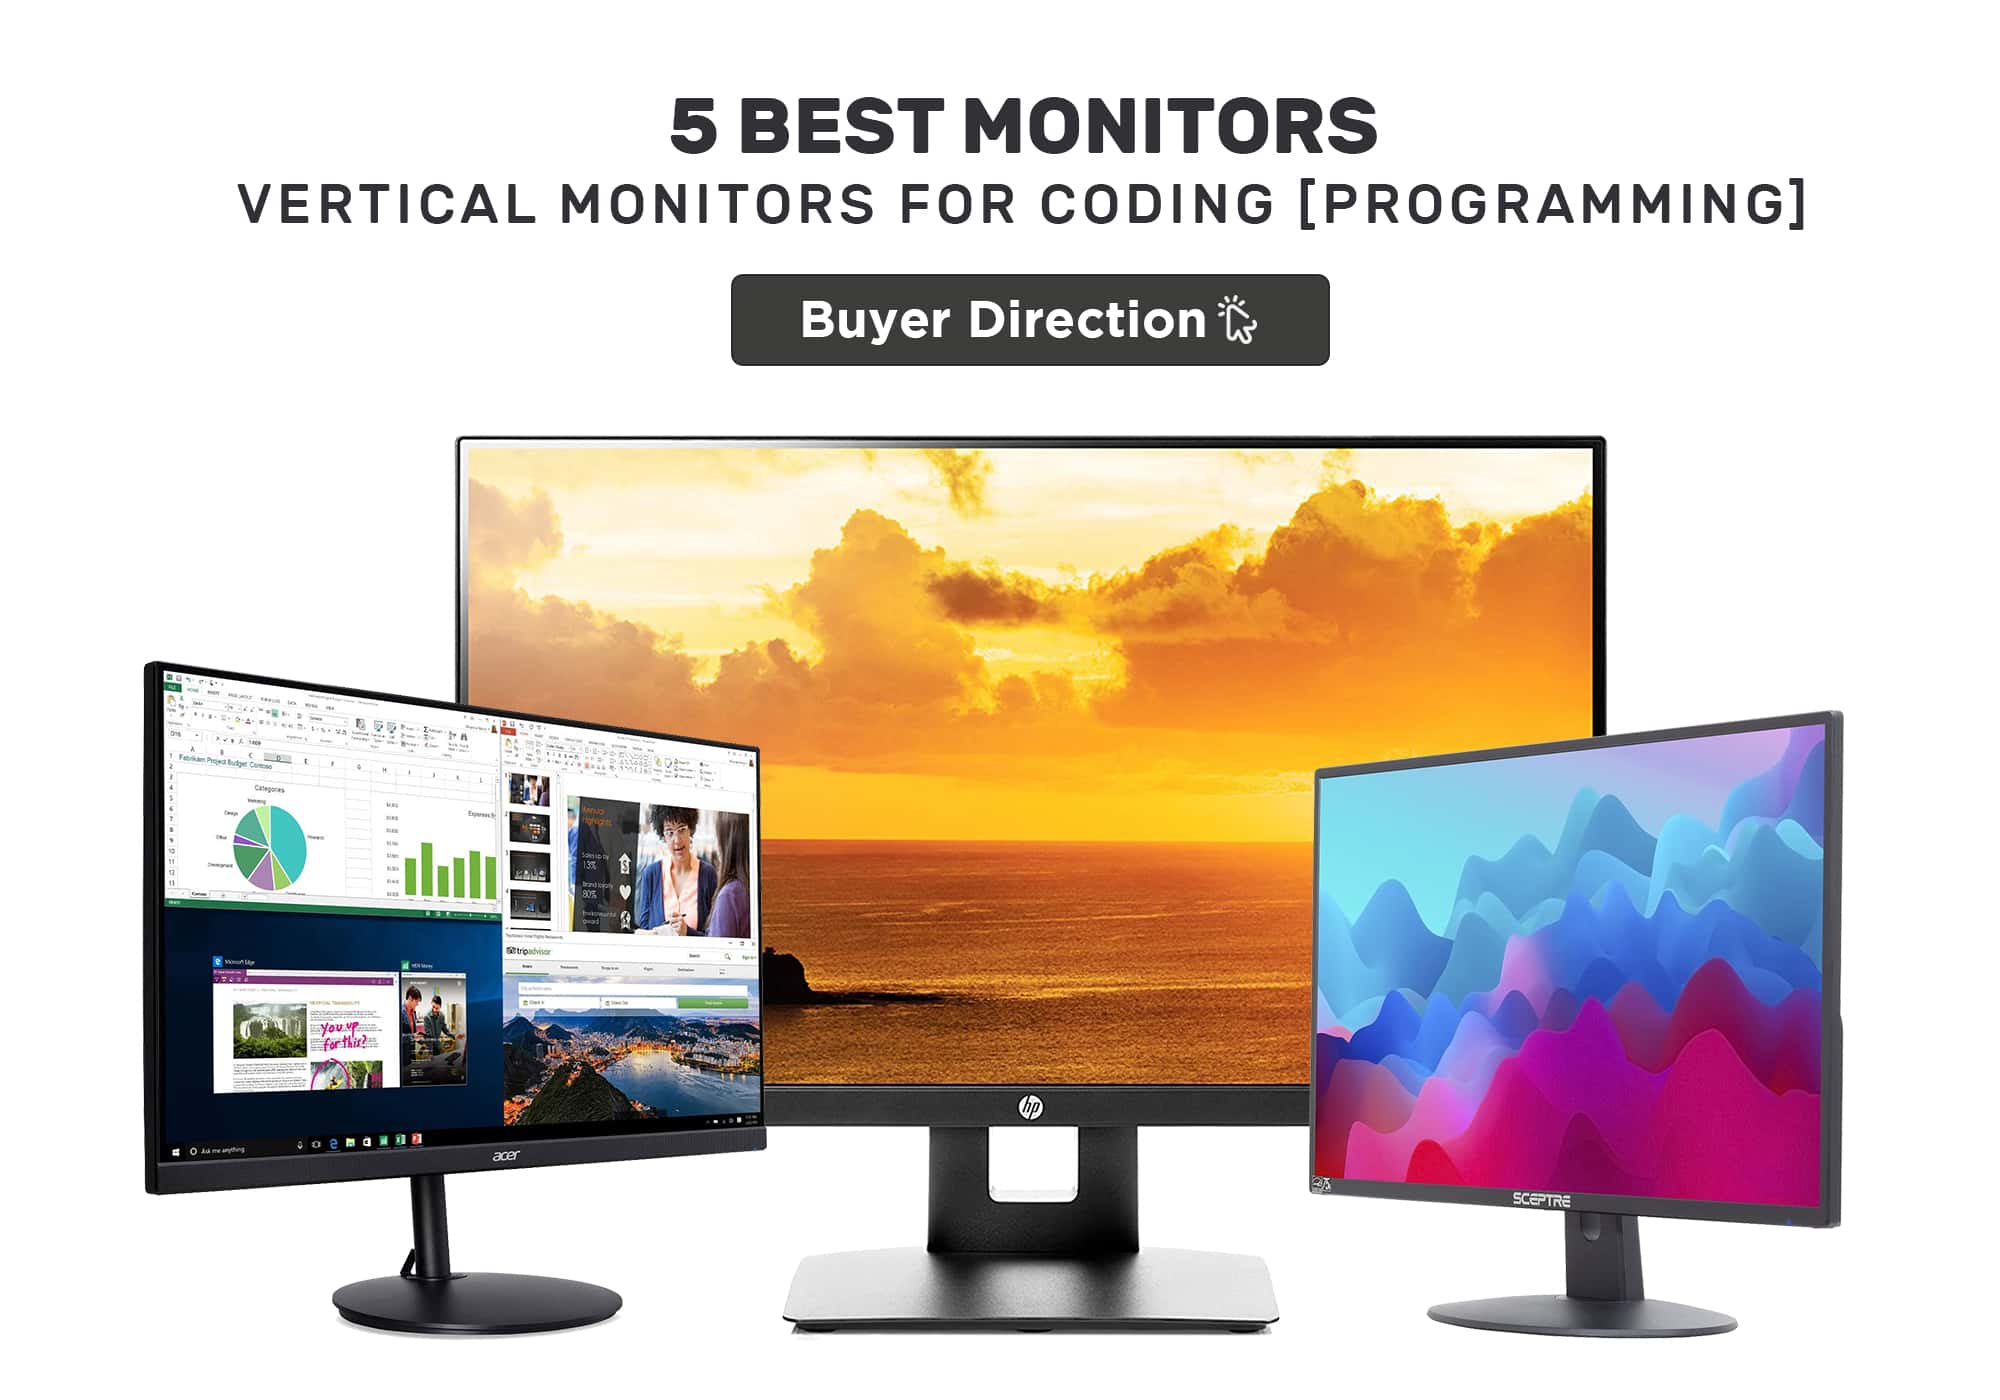 5 Best Vertical Monitors for Coding[Programming]